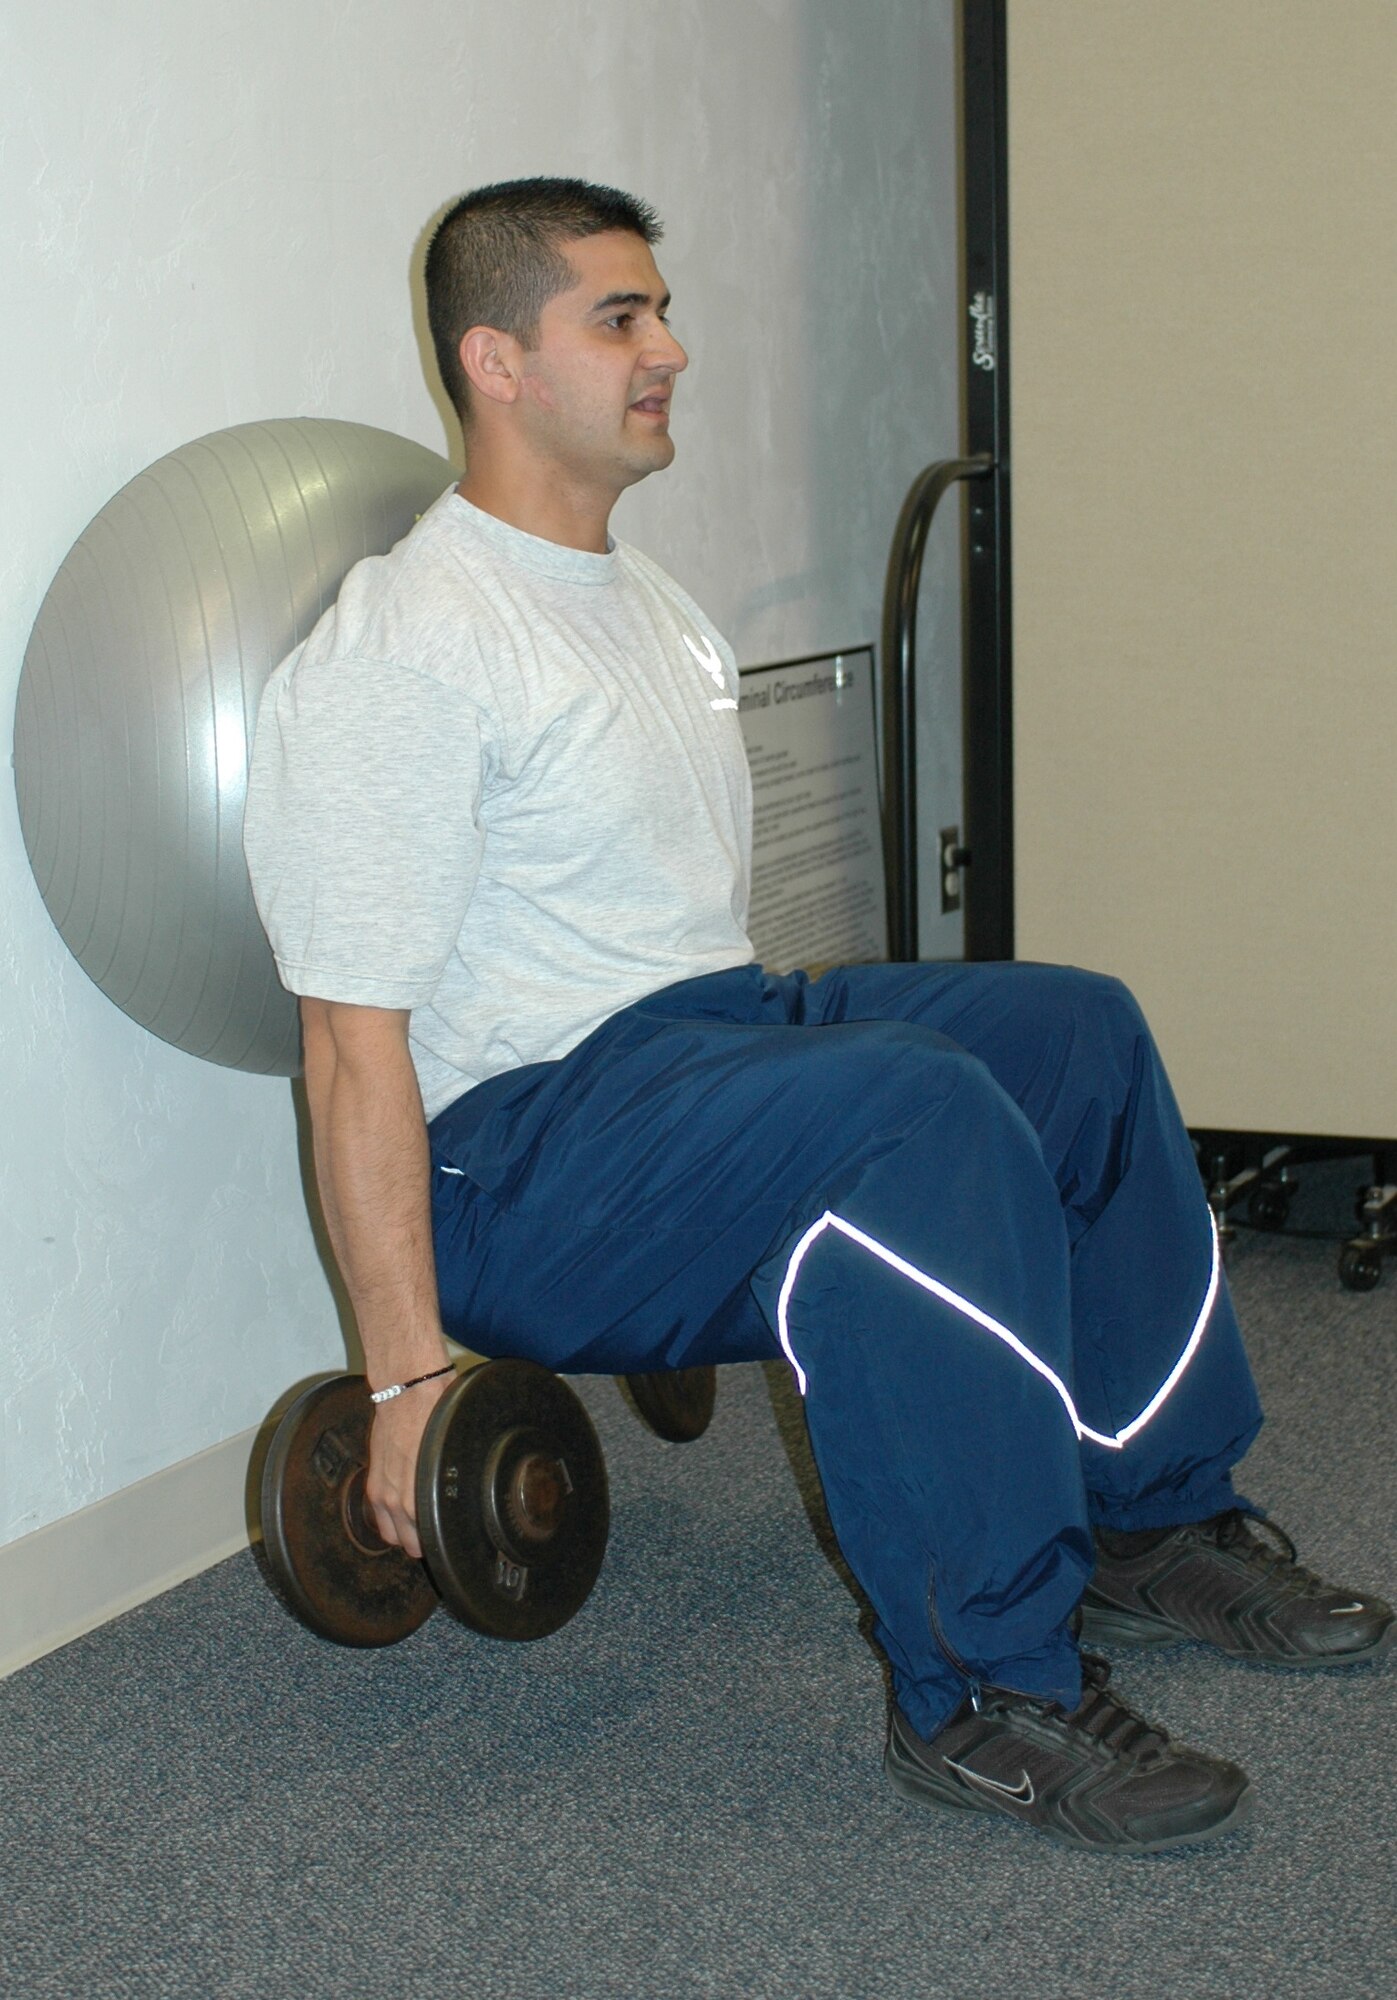 Staff Sgt. Virgil Mendivil exercises during a 9G session. “I didn’t think I was overweight when I joined the program, but my pre-assessment results were eye-opening.  I learned that no matter how skinny you are, your body fat percentage will affect your body’s overall performance,” he said. (Air National Guard photo by Capt. Gabe Johnson)